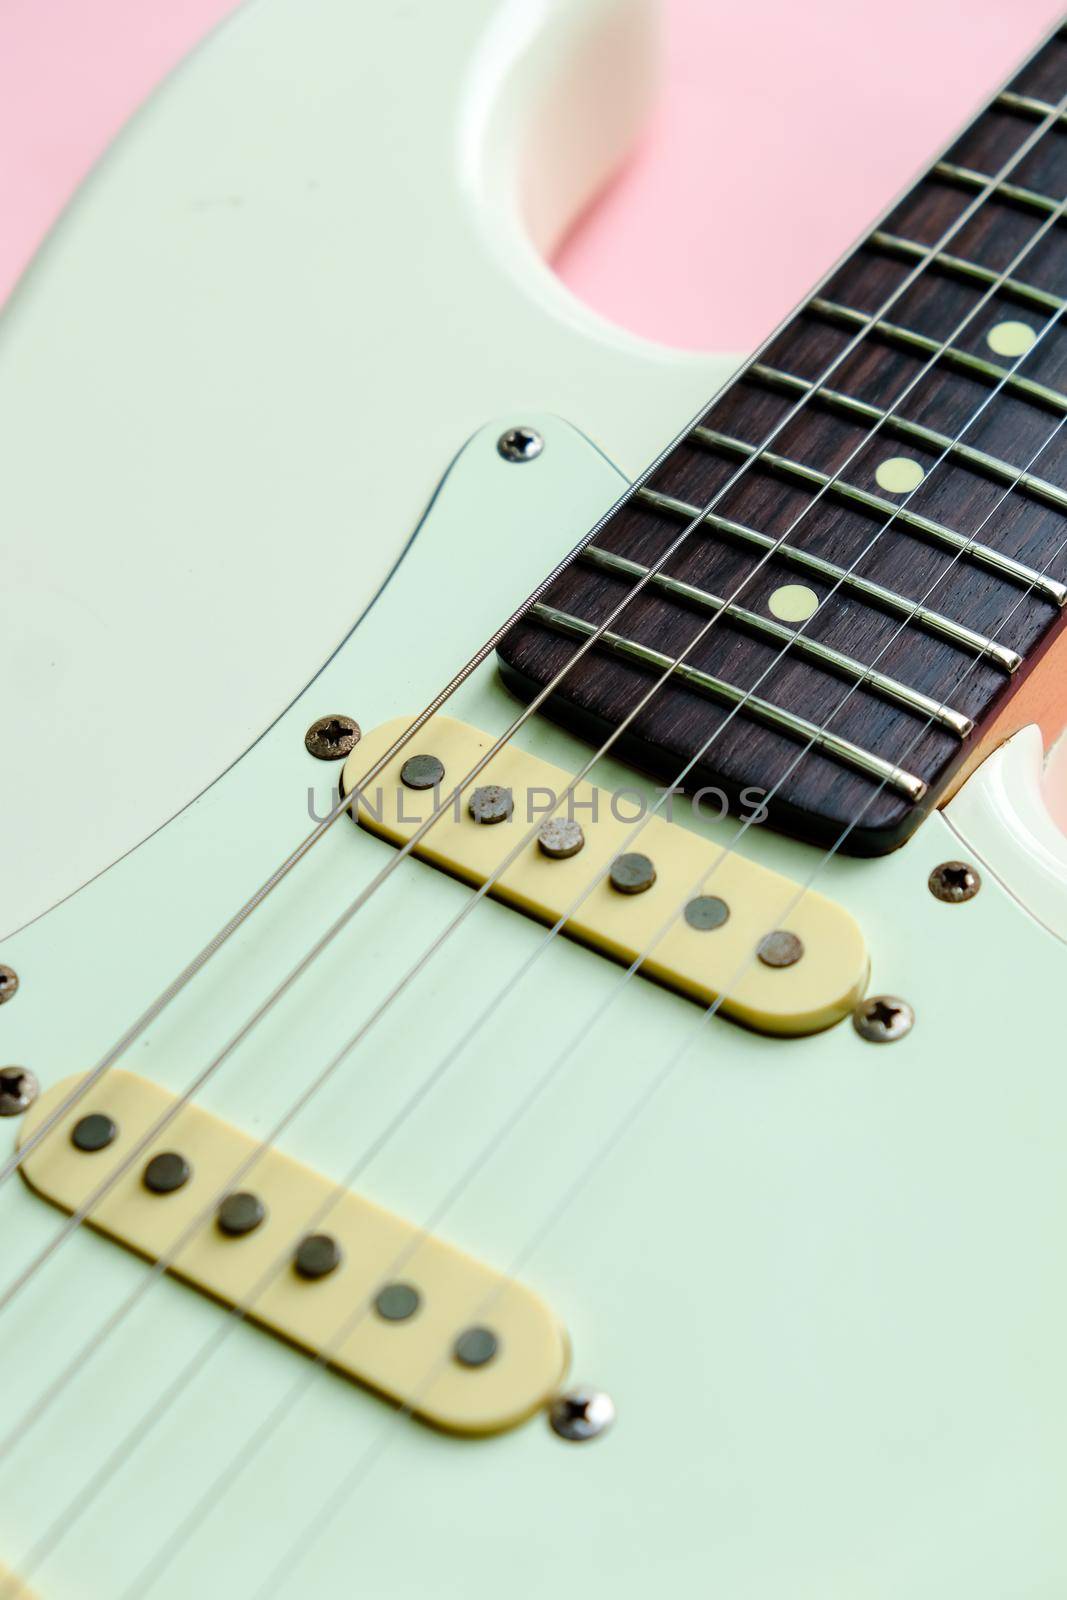 Detail of White Electric Guitar on a pink background.